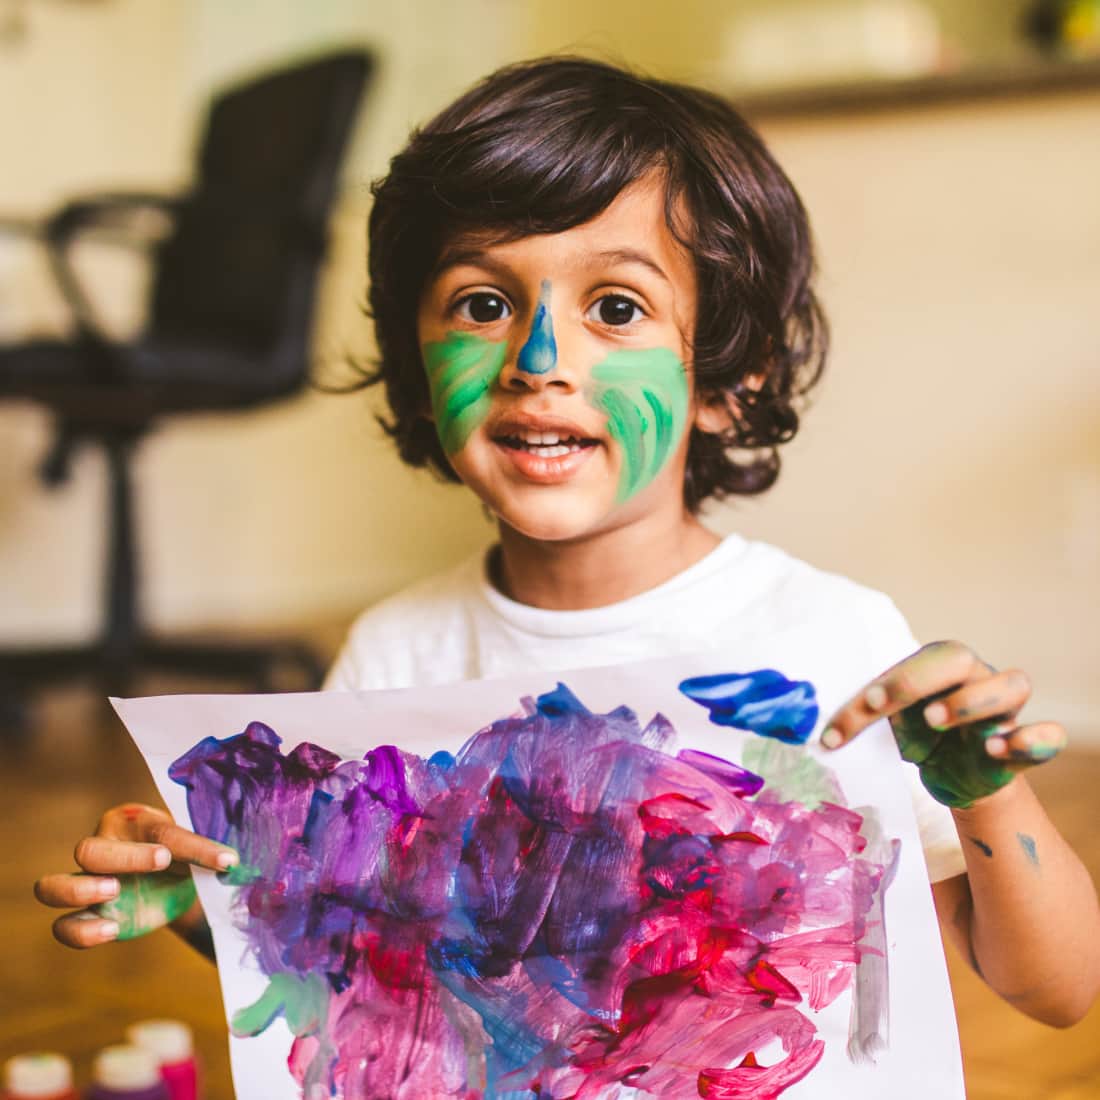 Little boy doing finger painting at home and showing off his artwork